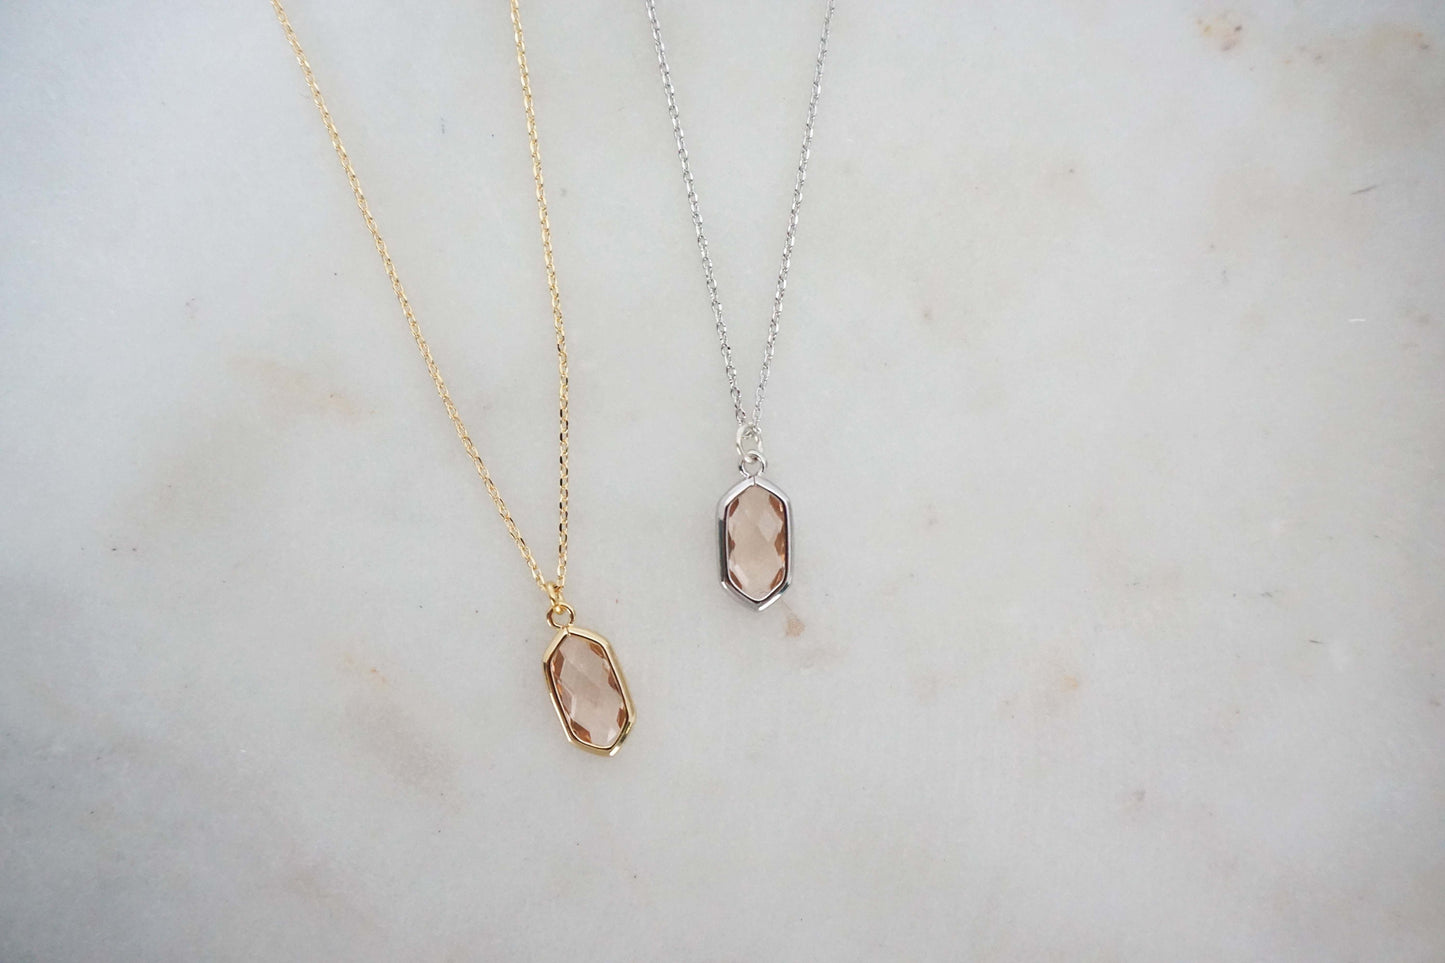 Champagne Gem Hexagon Necklaces | Bridesmaid Necklace | Wedding Jewelry | NCHPG33, NCHPS33